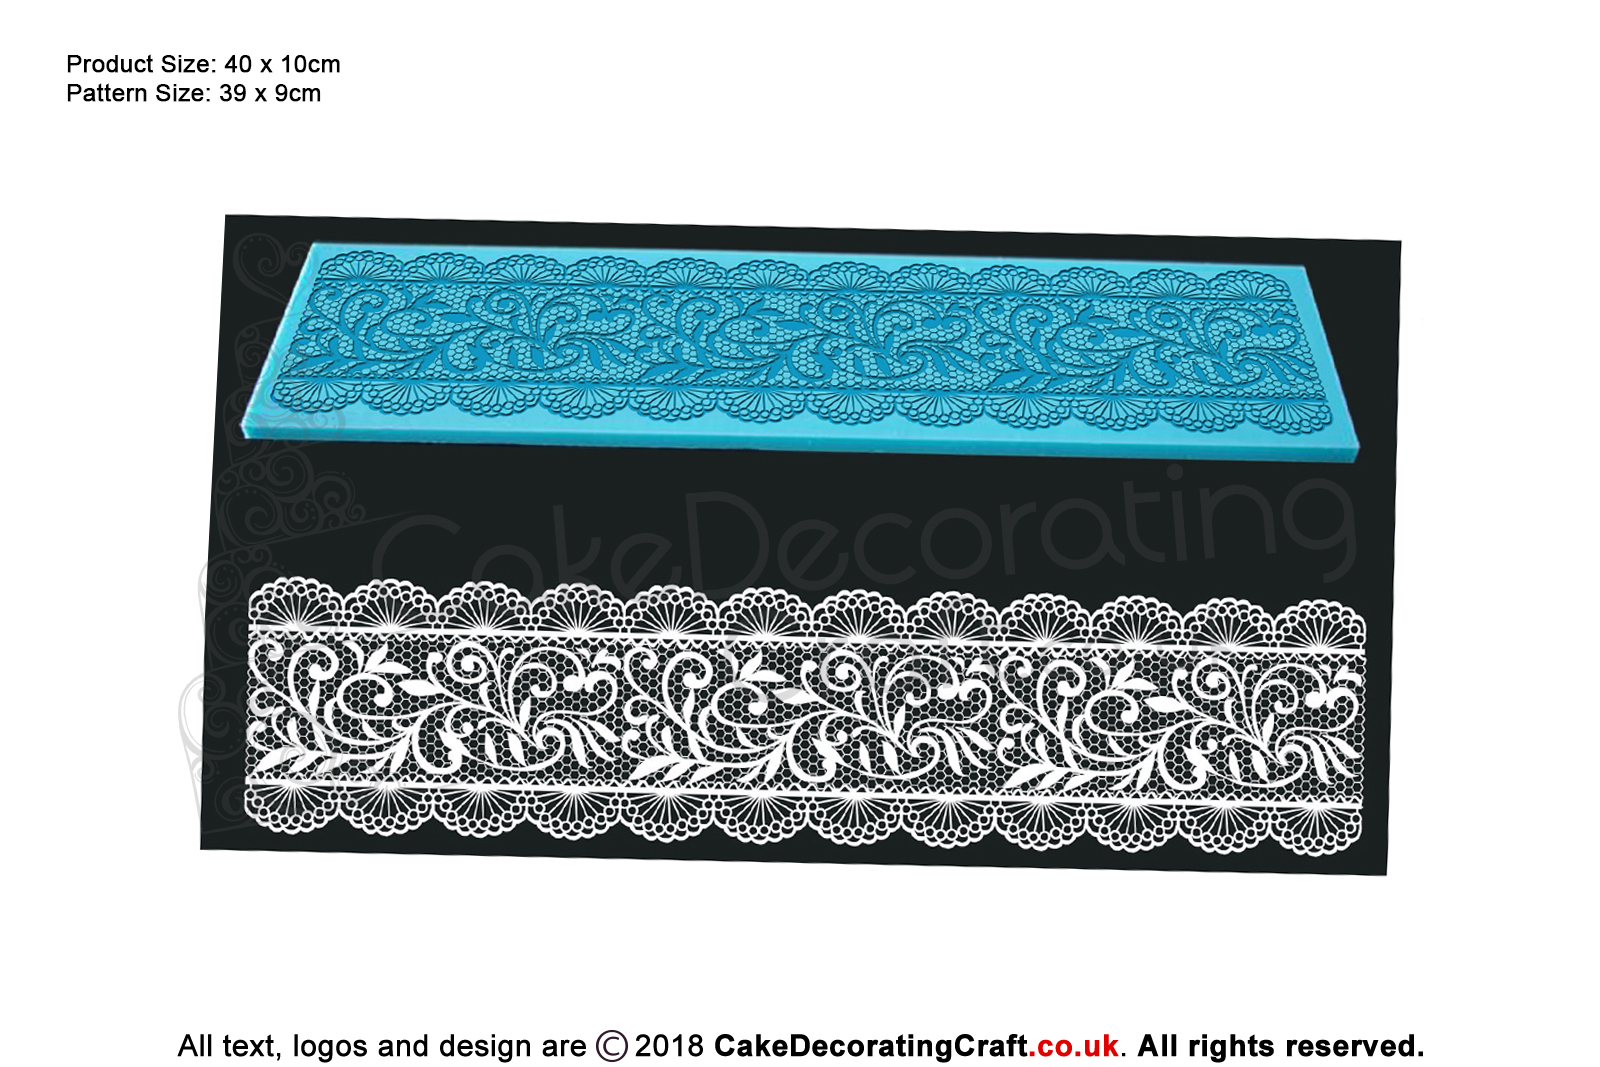 Chantelle | Cake Lace Mats for Edible Cake Lace Mixes and Premixes | Cake Decorating Craft Tool | Cake Makers Christmas Gifts Ideas